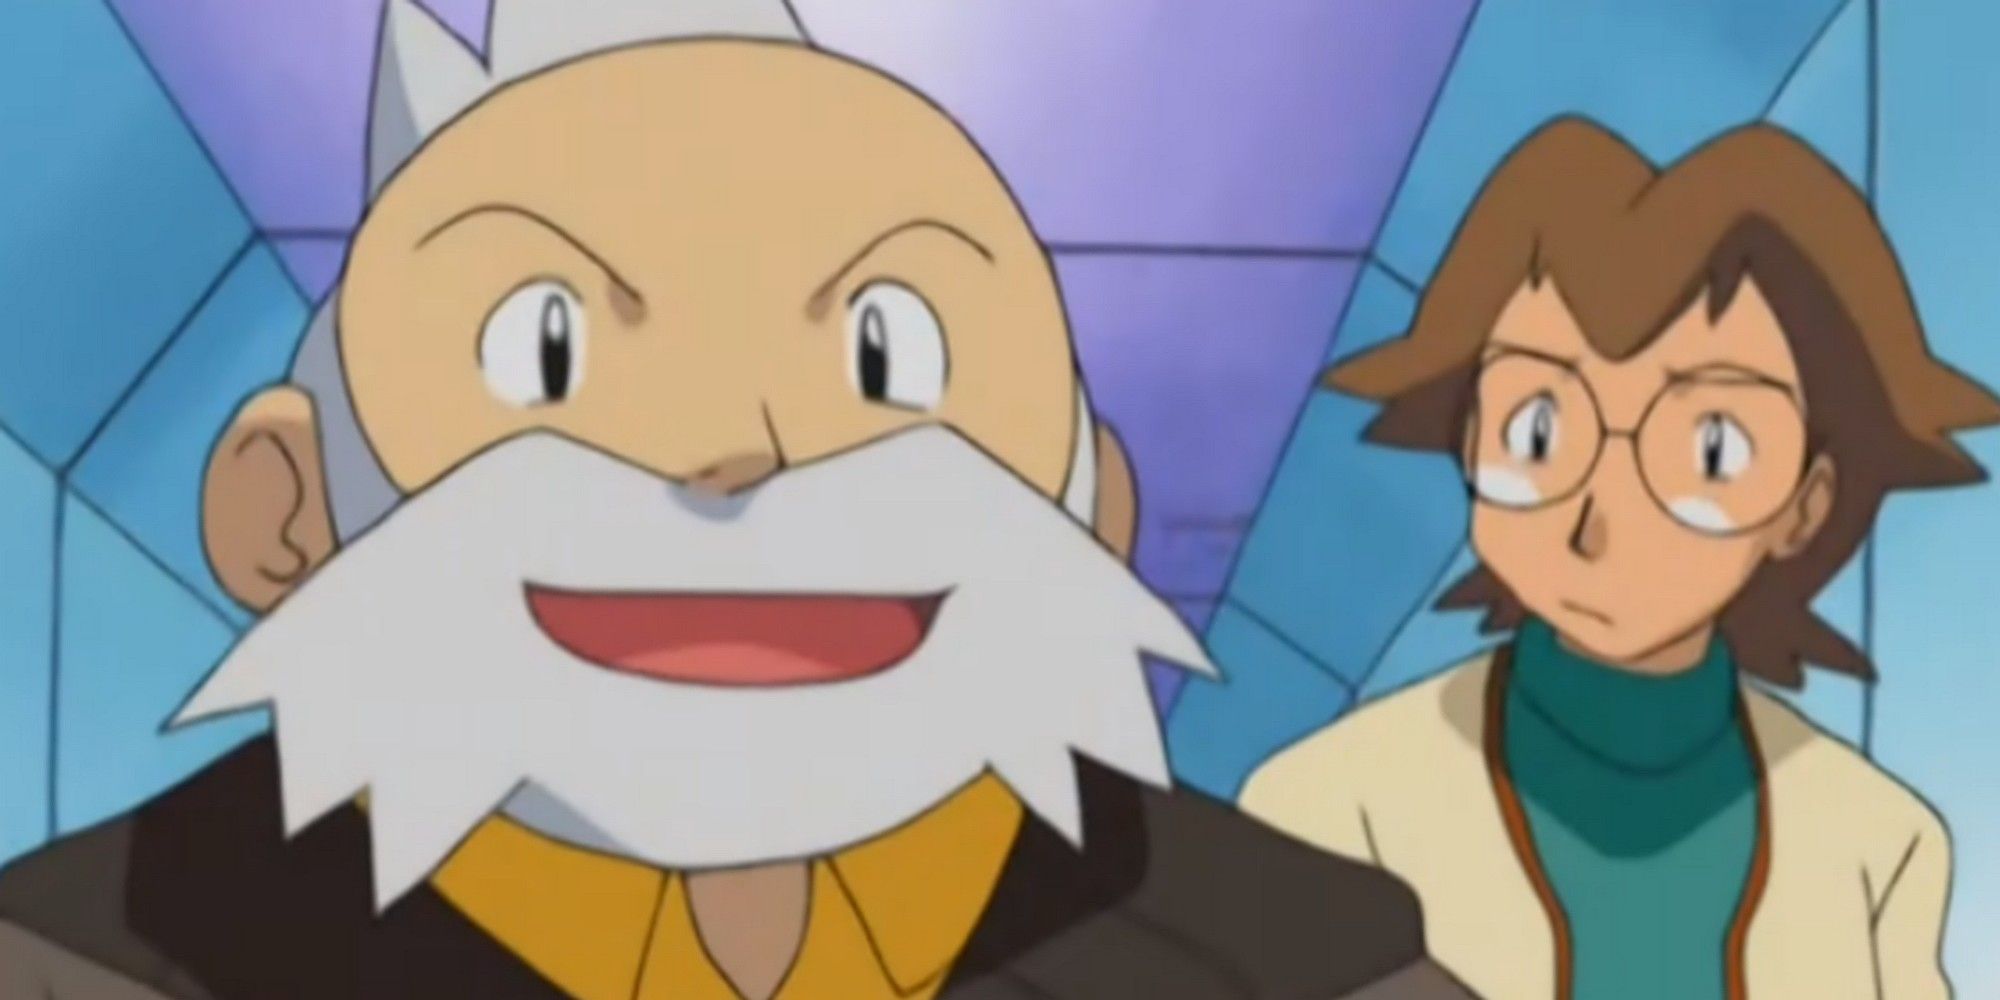 Wattson, the electric-type gym leader, from the Pokemon anime